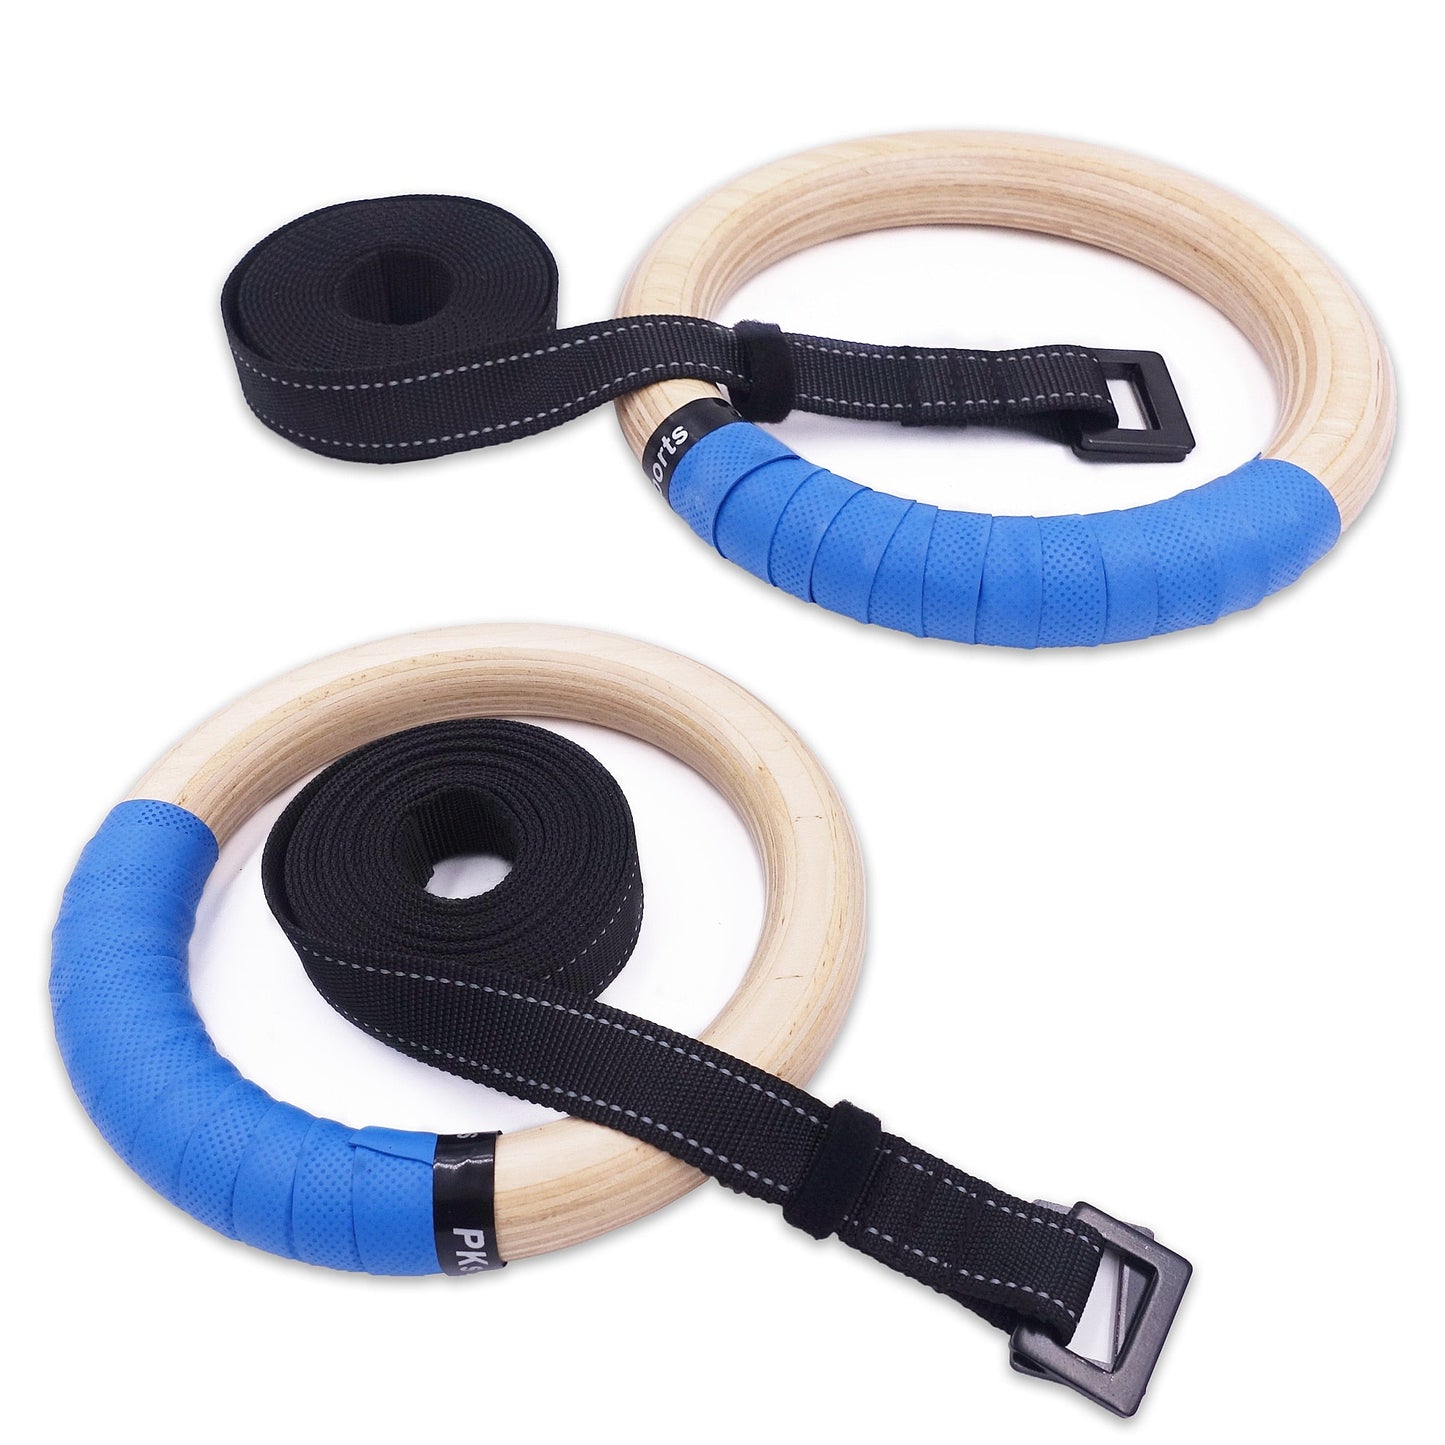 Wooden-Gymnastic-Rings-for-Kids-25mm-Gym-Ring-with-Adjustable-Straps-Buckles-Indoor-Fitness-Crossfit-Home-Playground-Gym-Pull-up